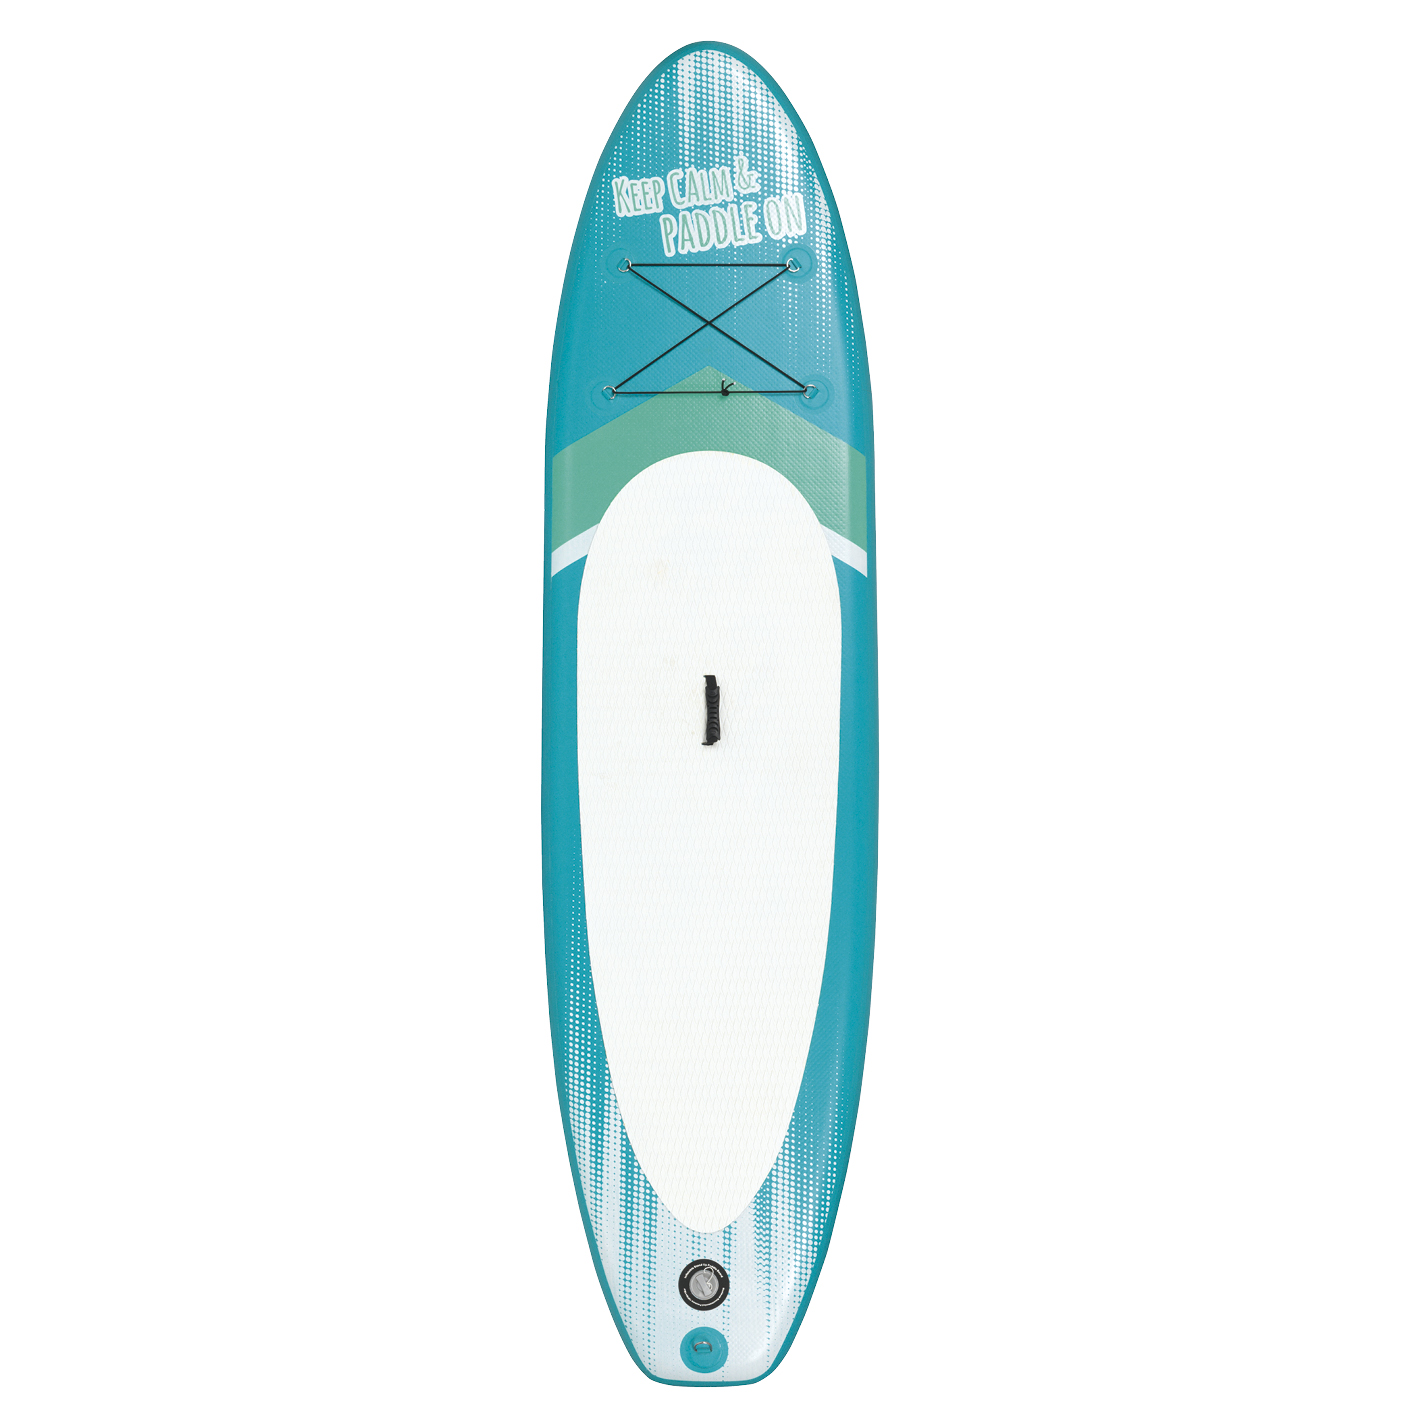 MAXXMEE 06007 Stand-Up Paddle-Board, mehrfarbig